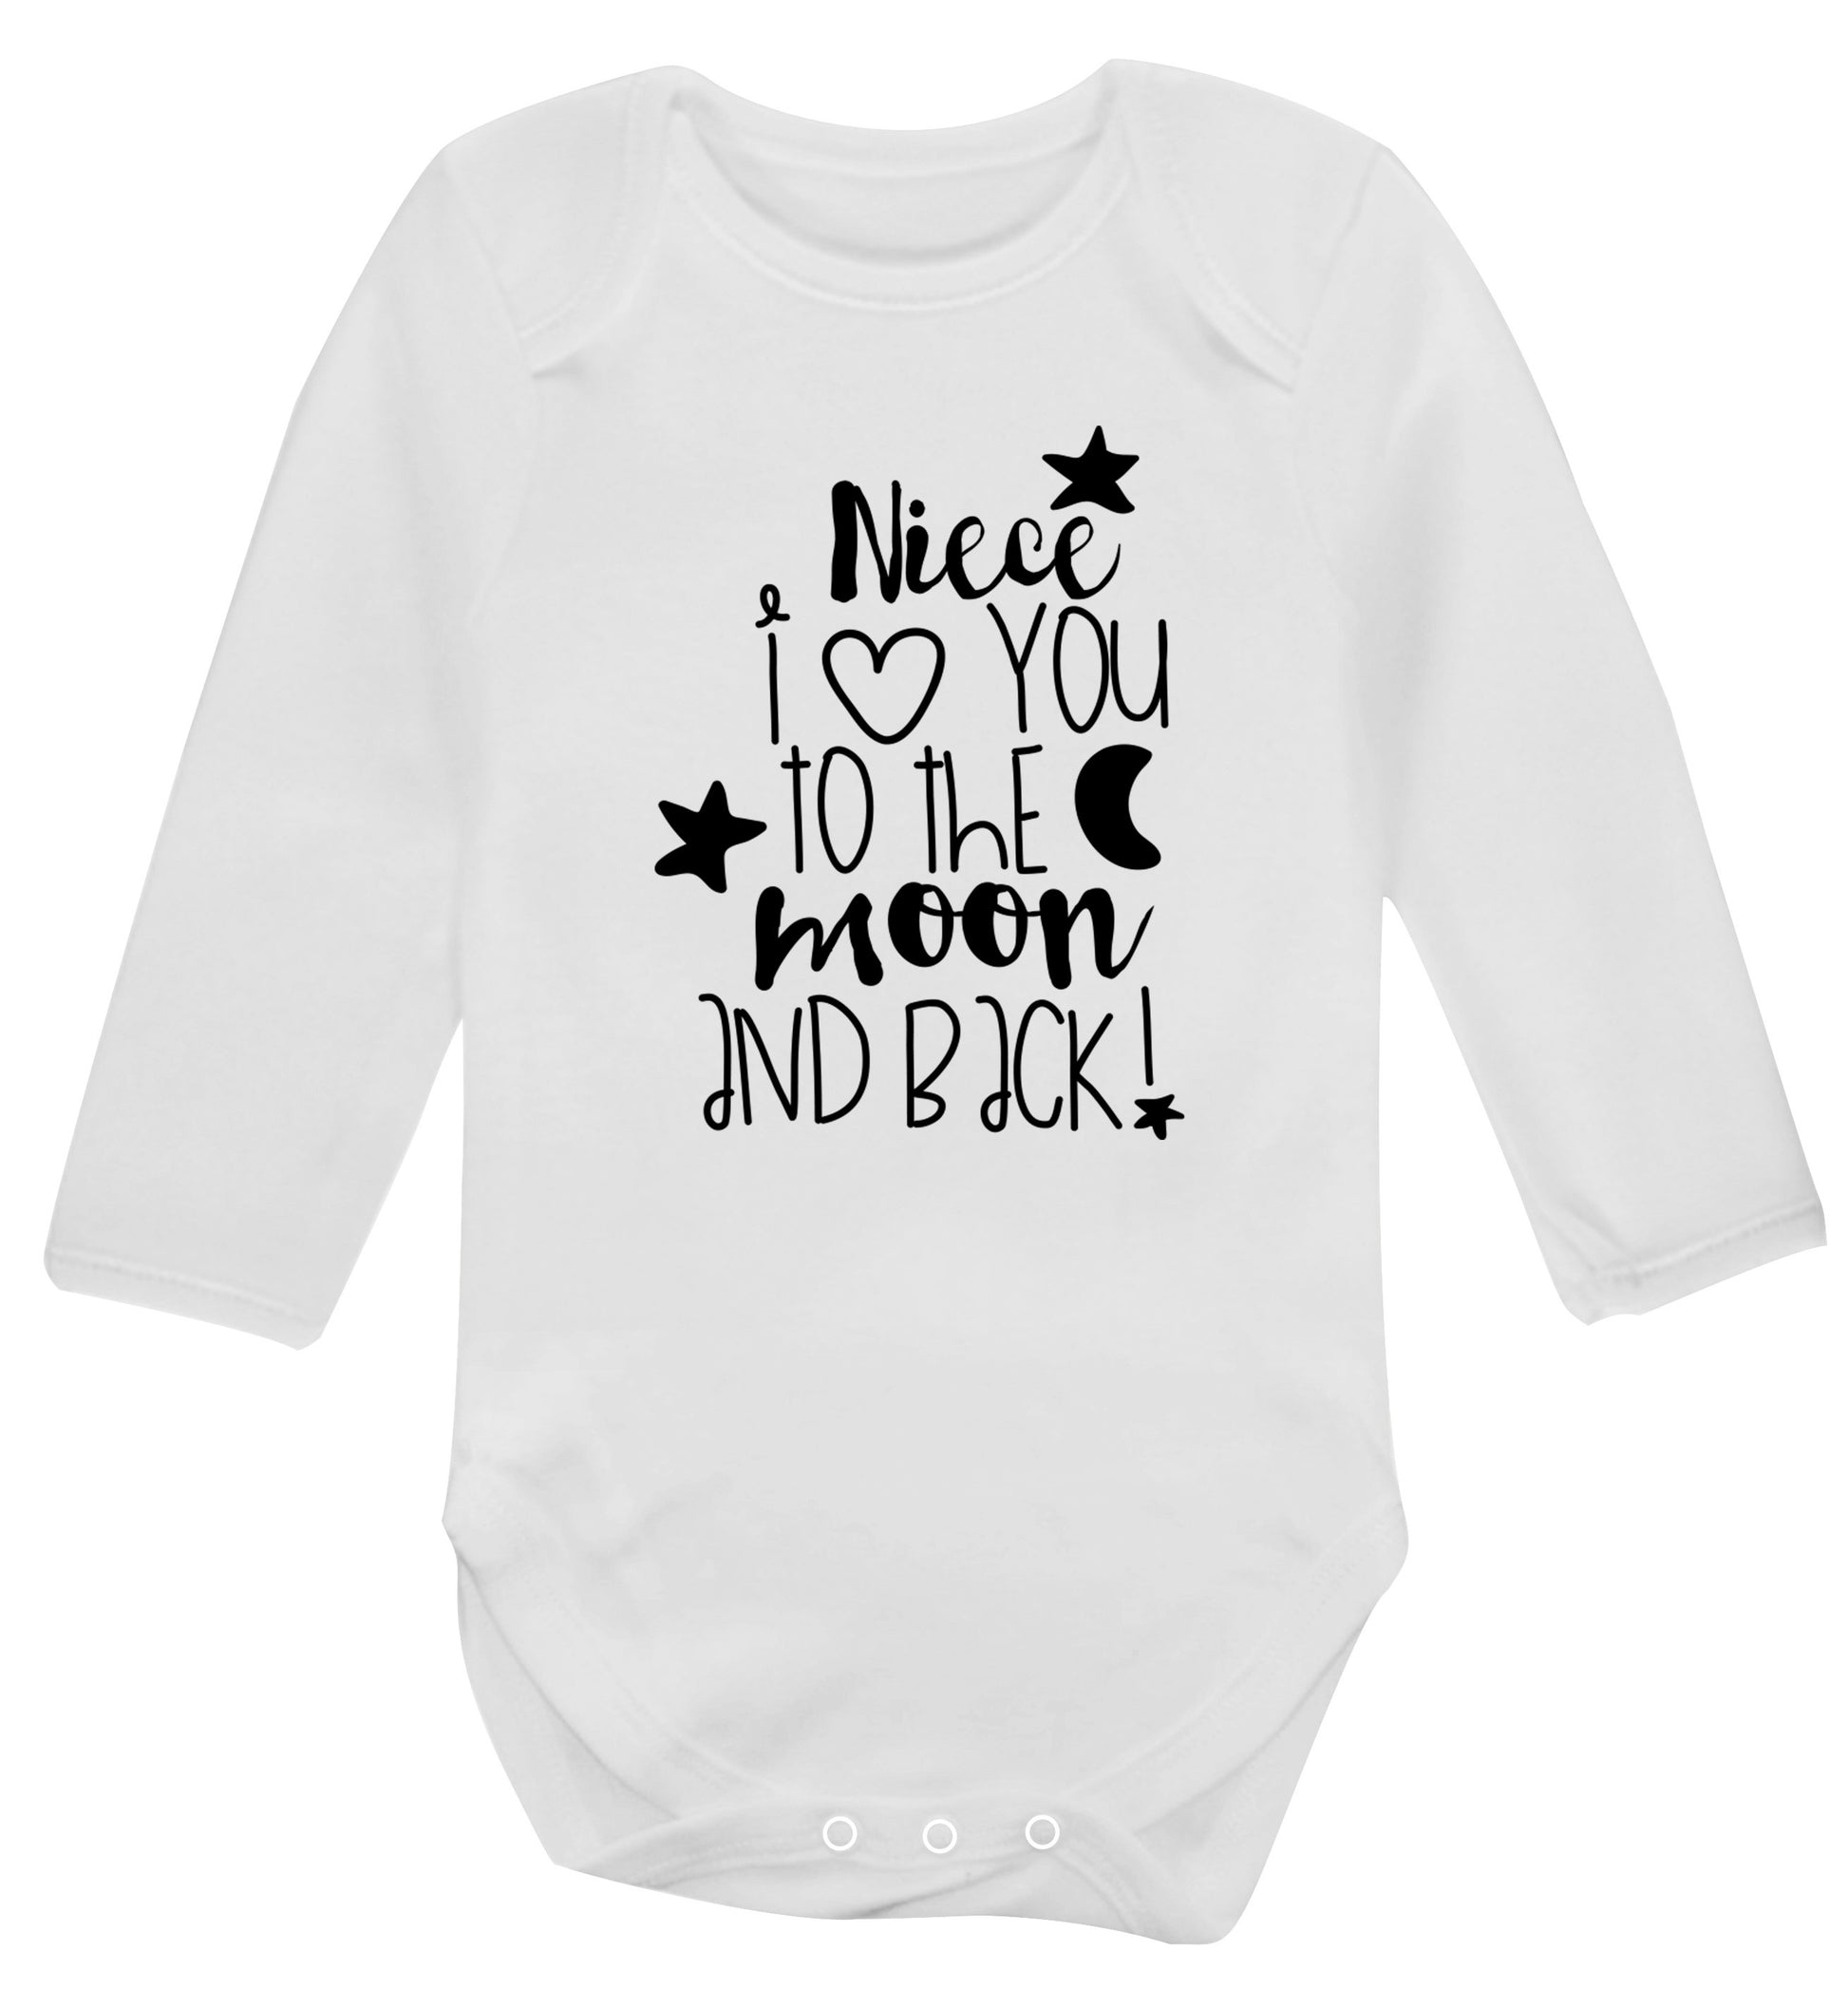 Niece I love you to the moon and back Baby Vest long sleeved white 6-12 months